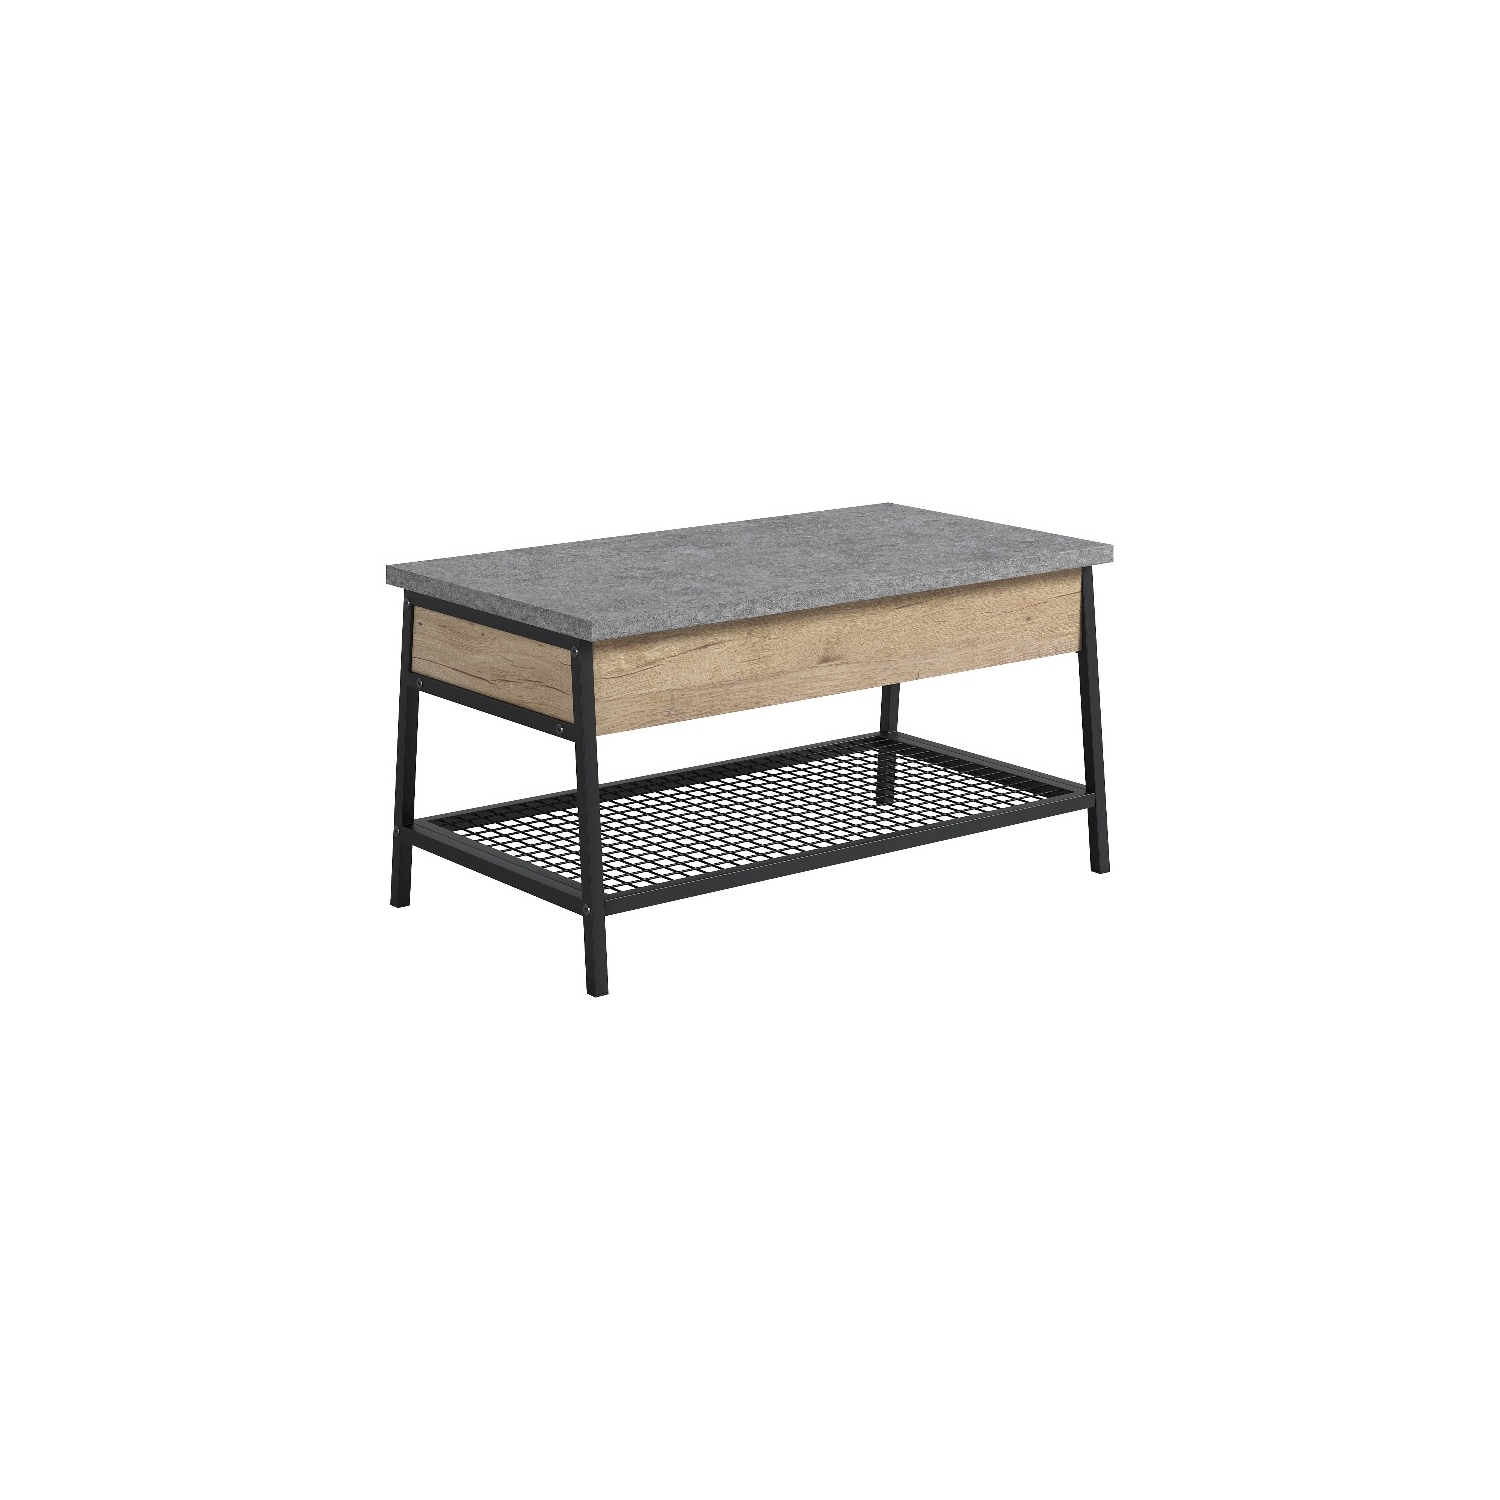 Sauder Market Commons Engineered Wood Lift-Top Coffee Table in Prime Oak